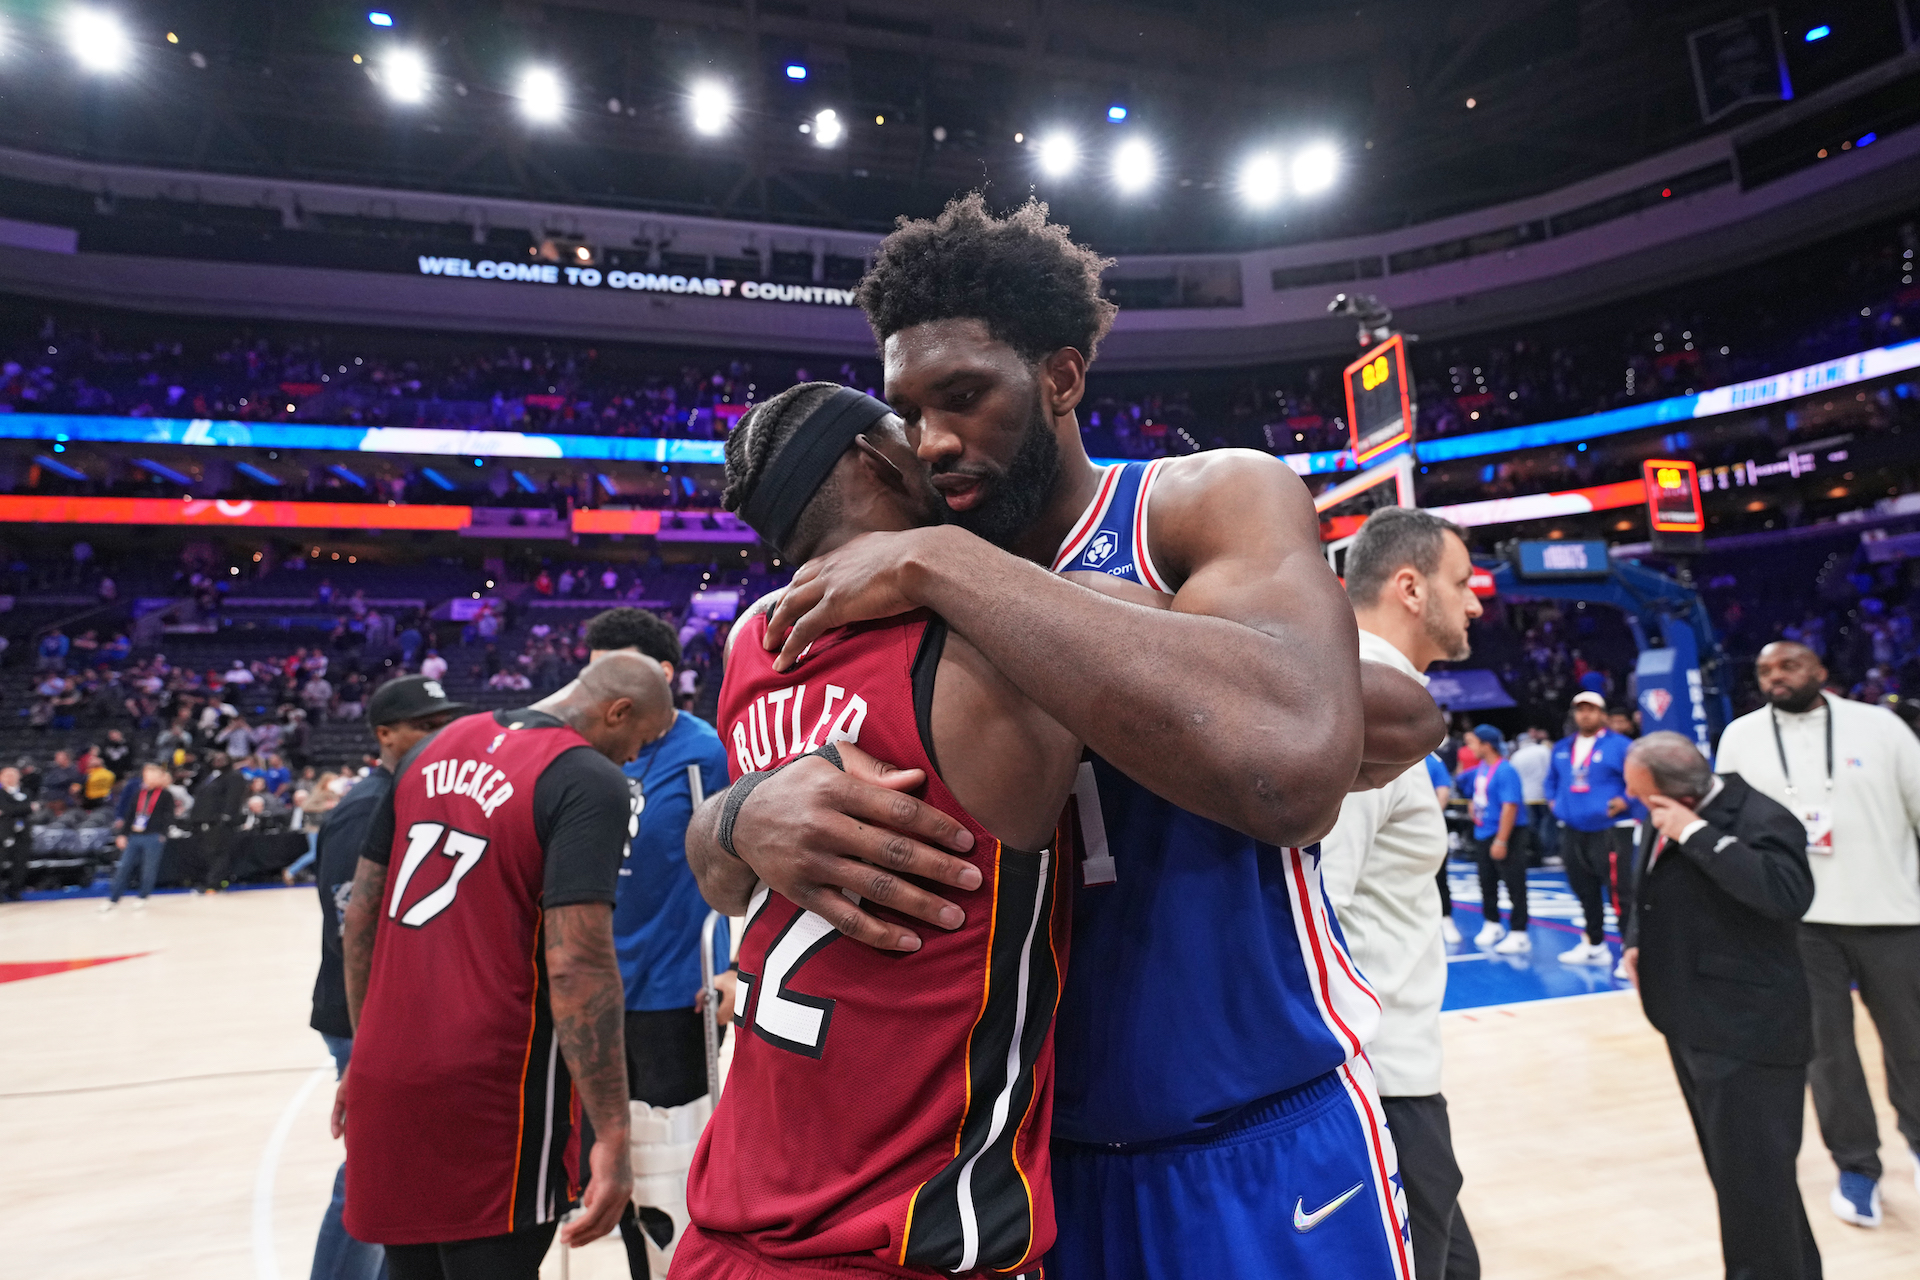 5 takeaways from the Heat's closeout Game 6 victory over the 76ers